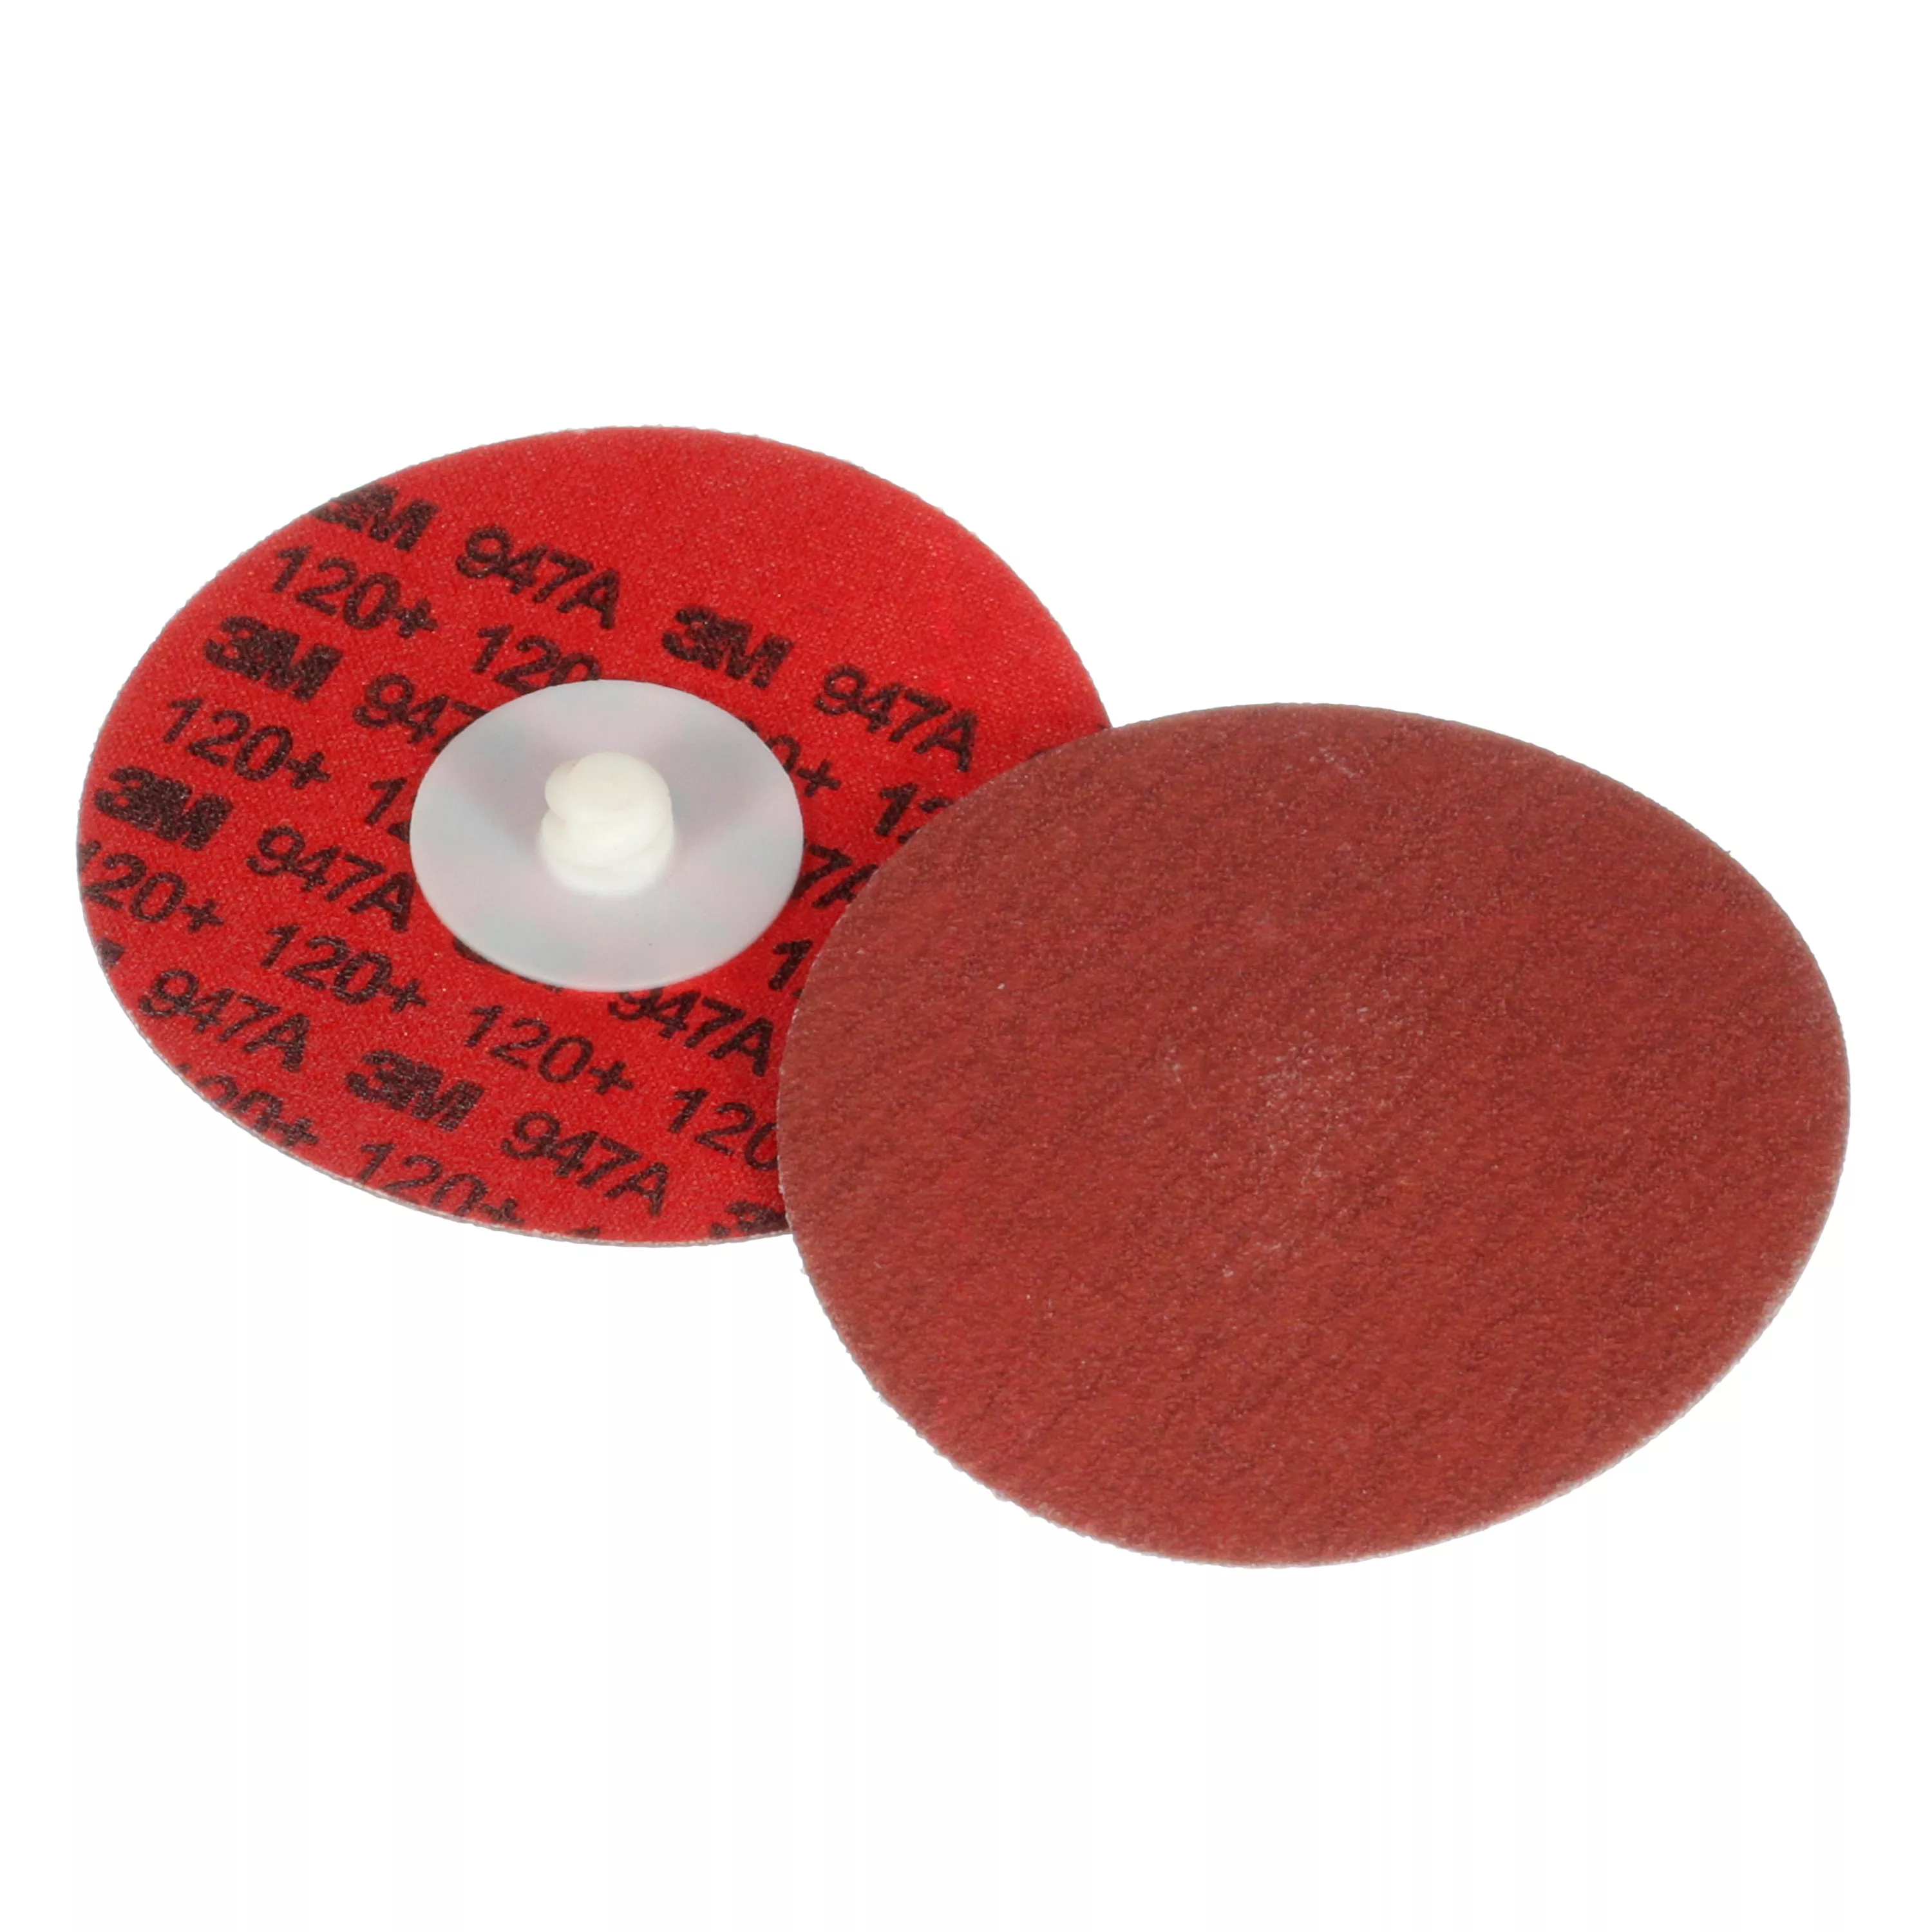 3M™ Cubitron™ II Roloc™ Durable Edge Disc 947A, 120+, X-weight, TR, Red,
3 in, Die R300V, 50/Carton, 200 ea/Case